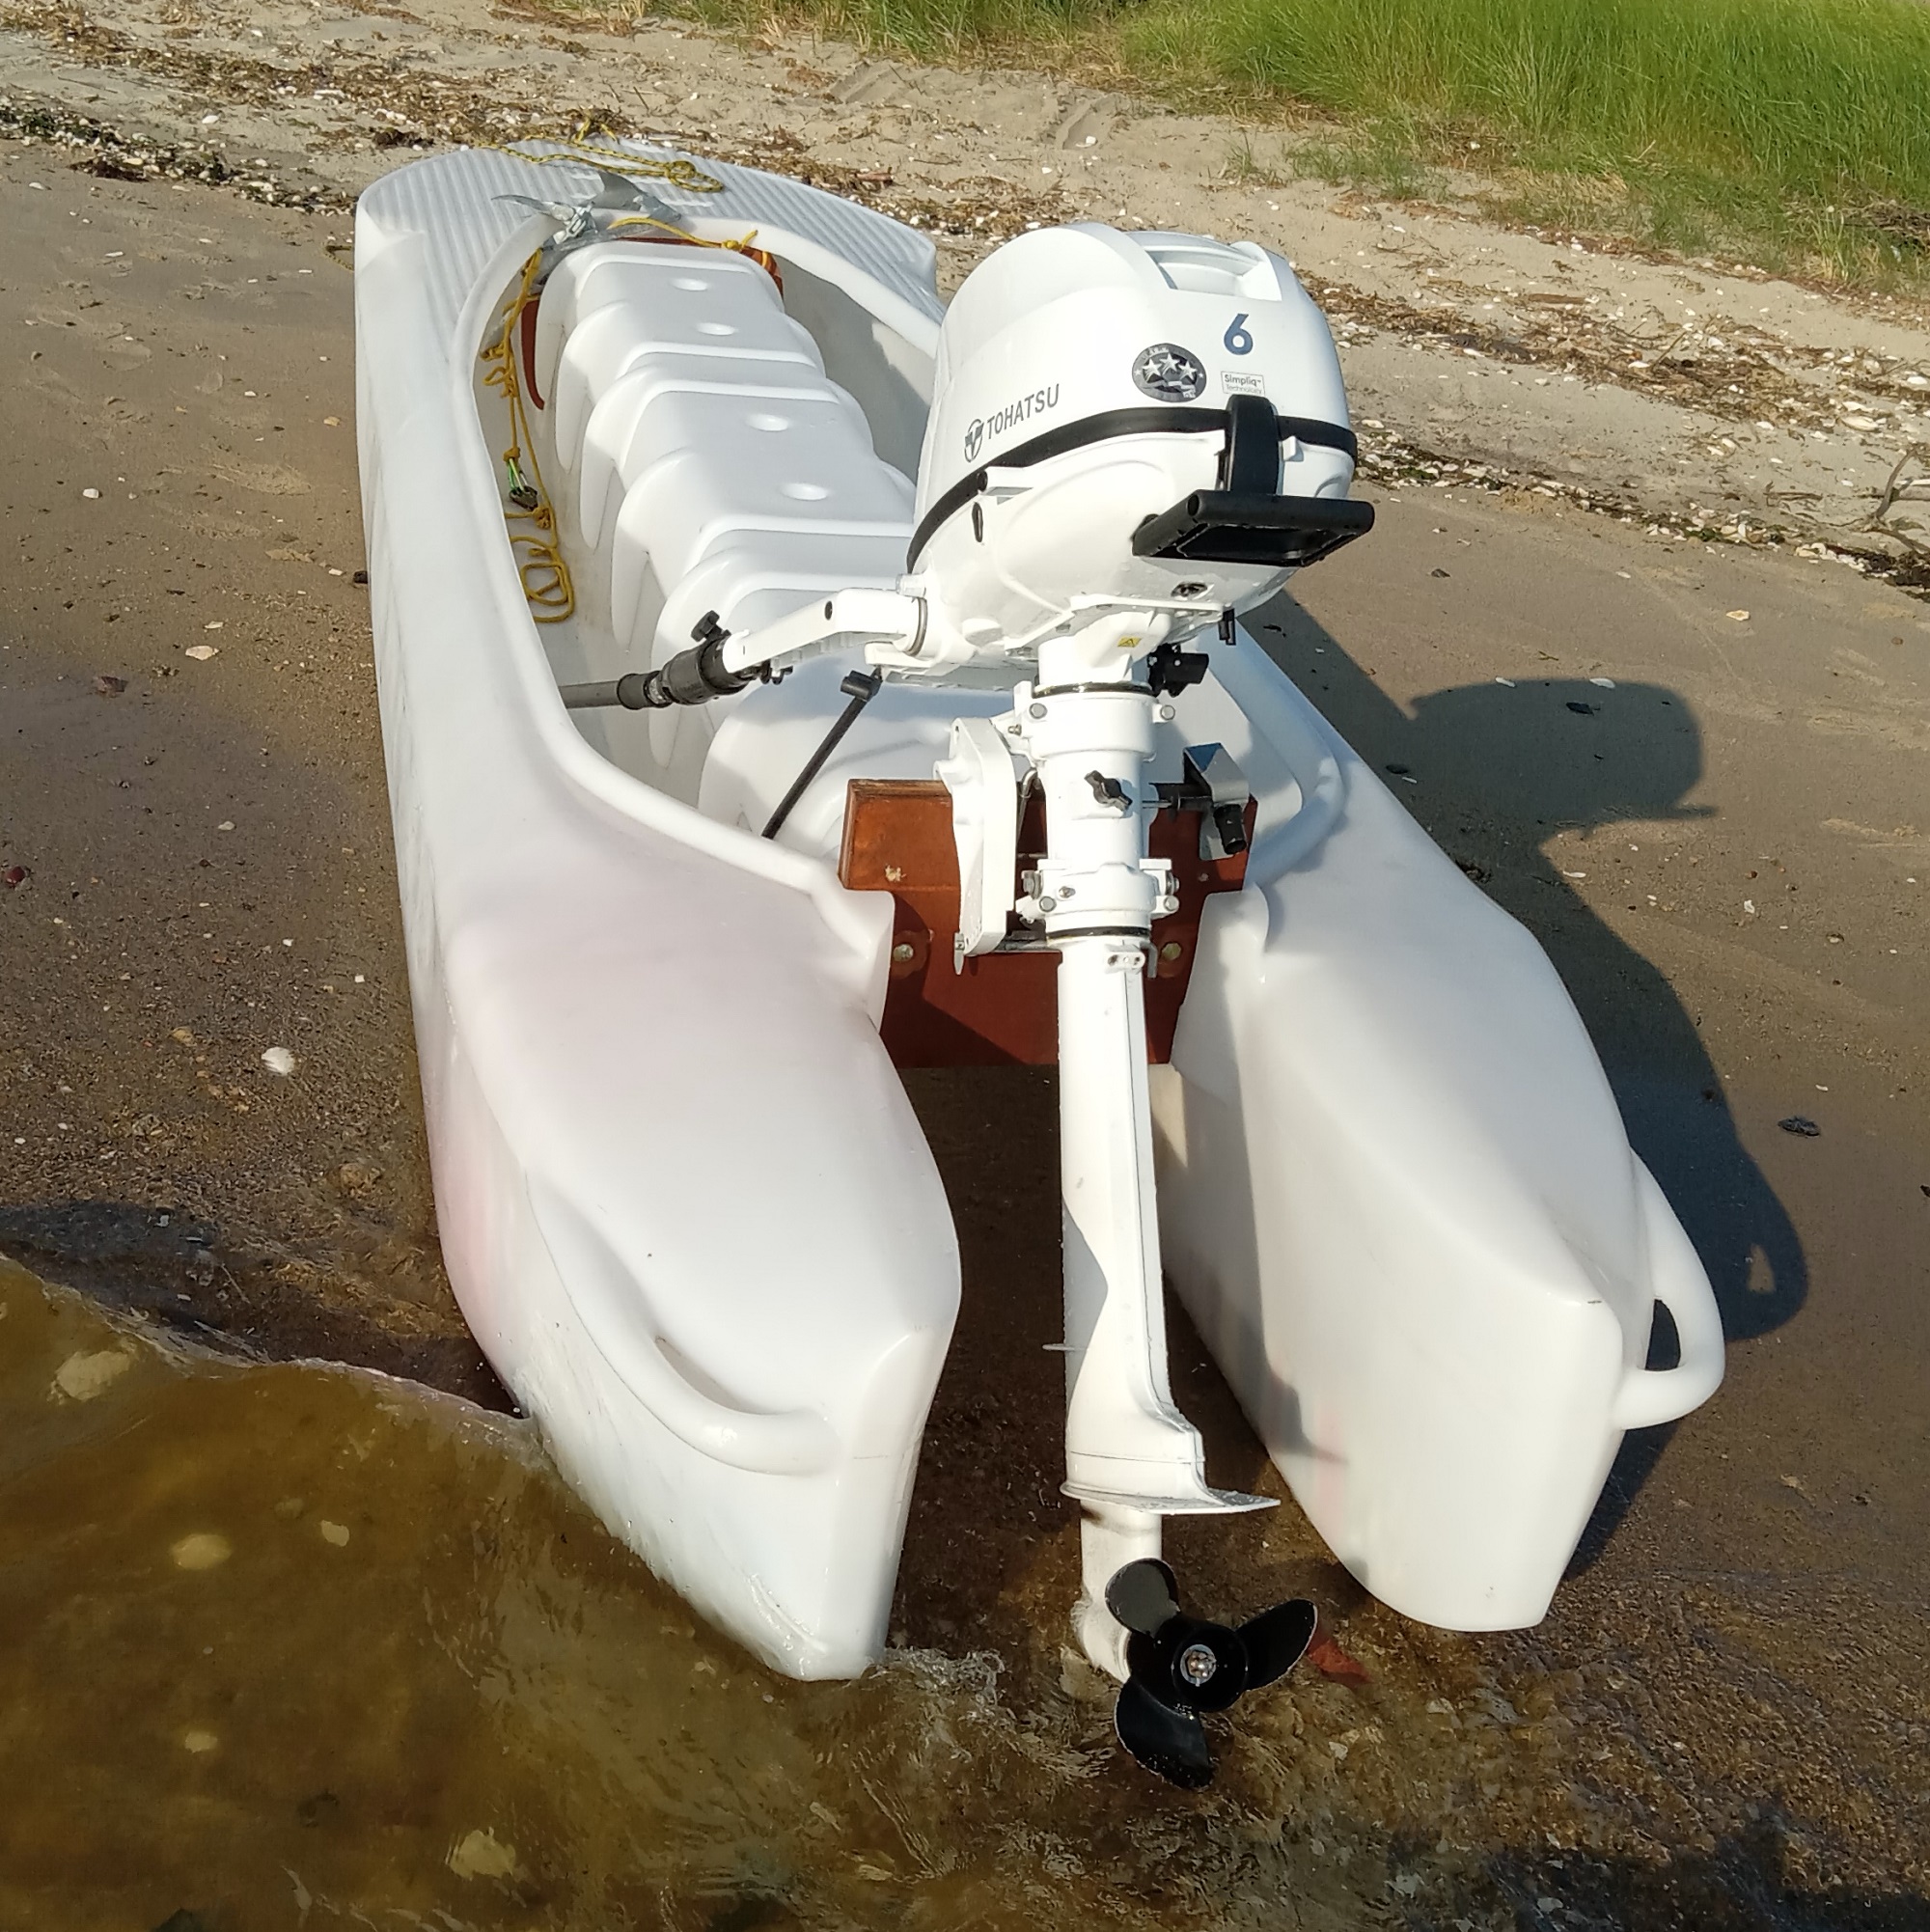 Transom Design For Powerful Outboard Motors